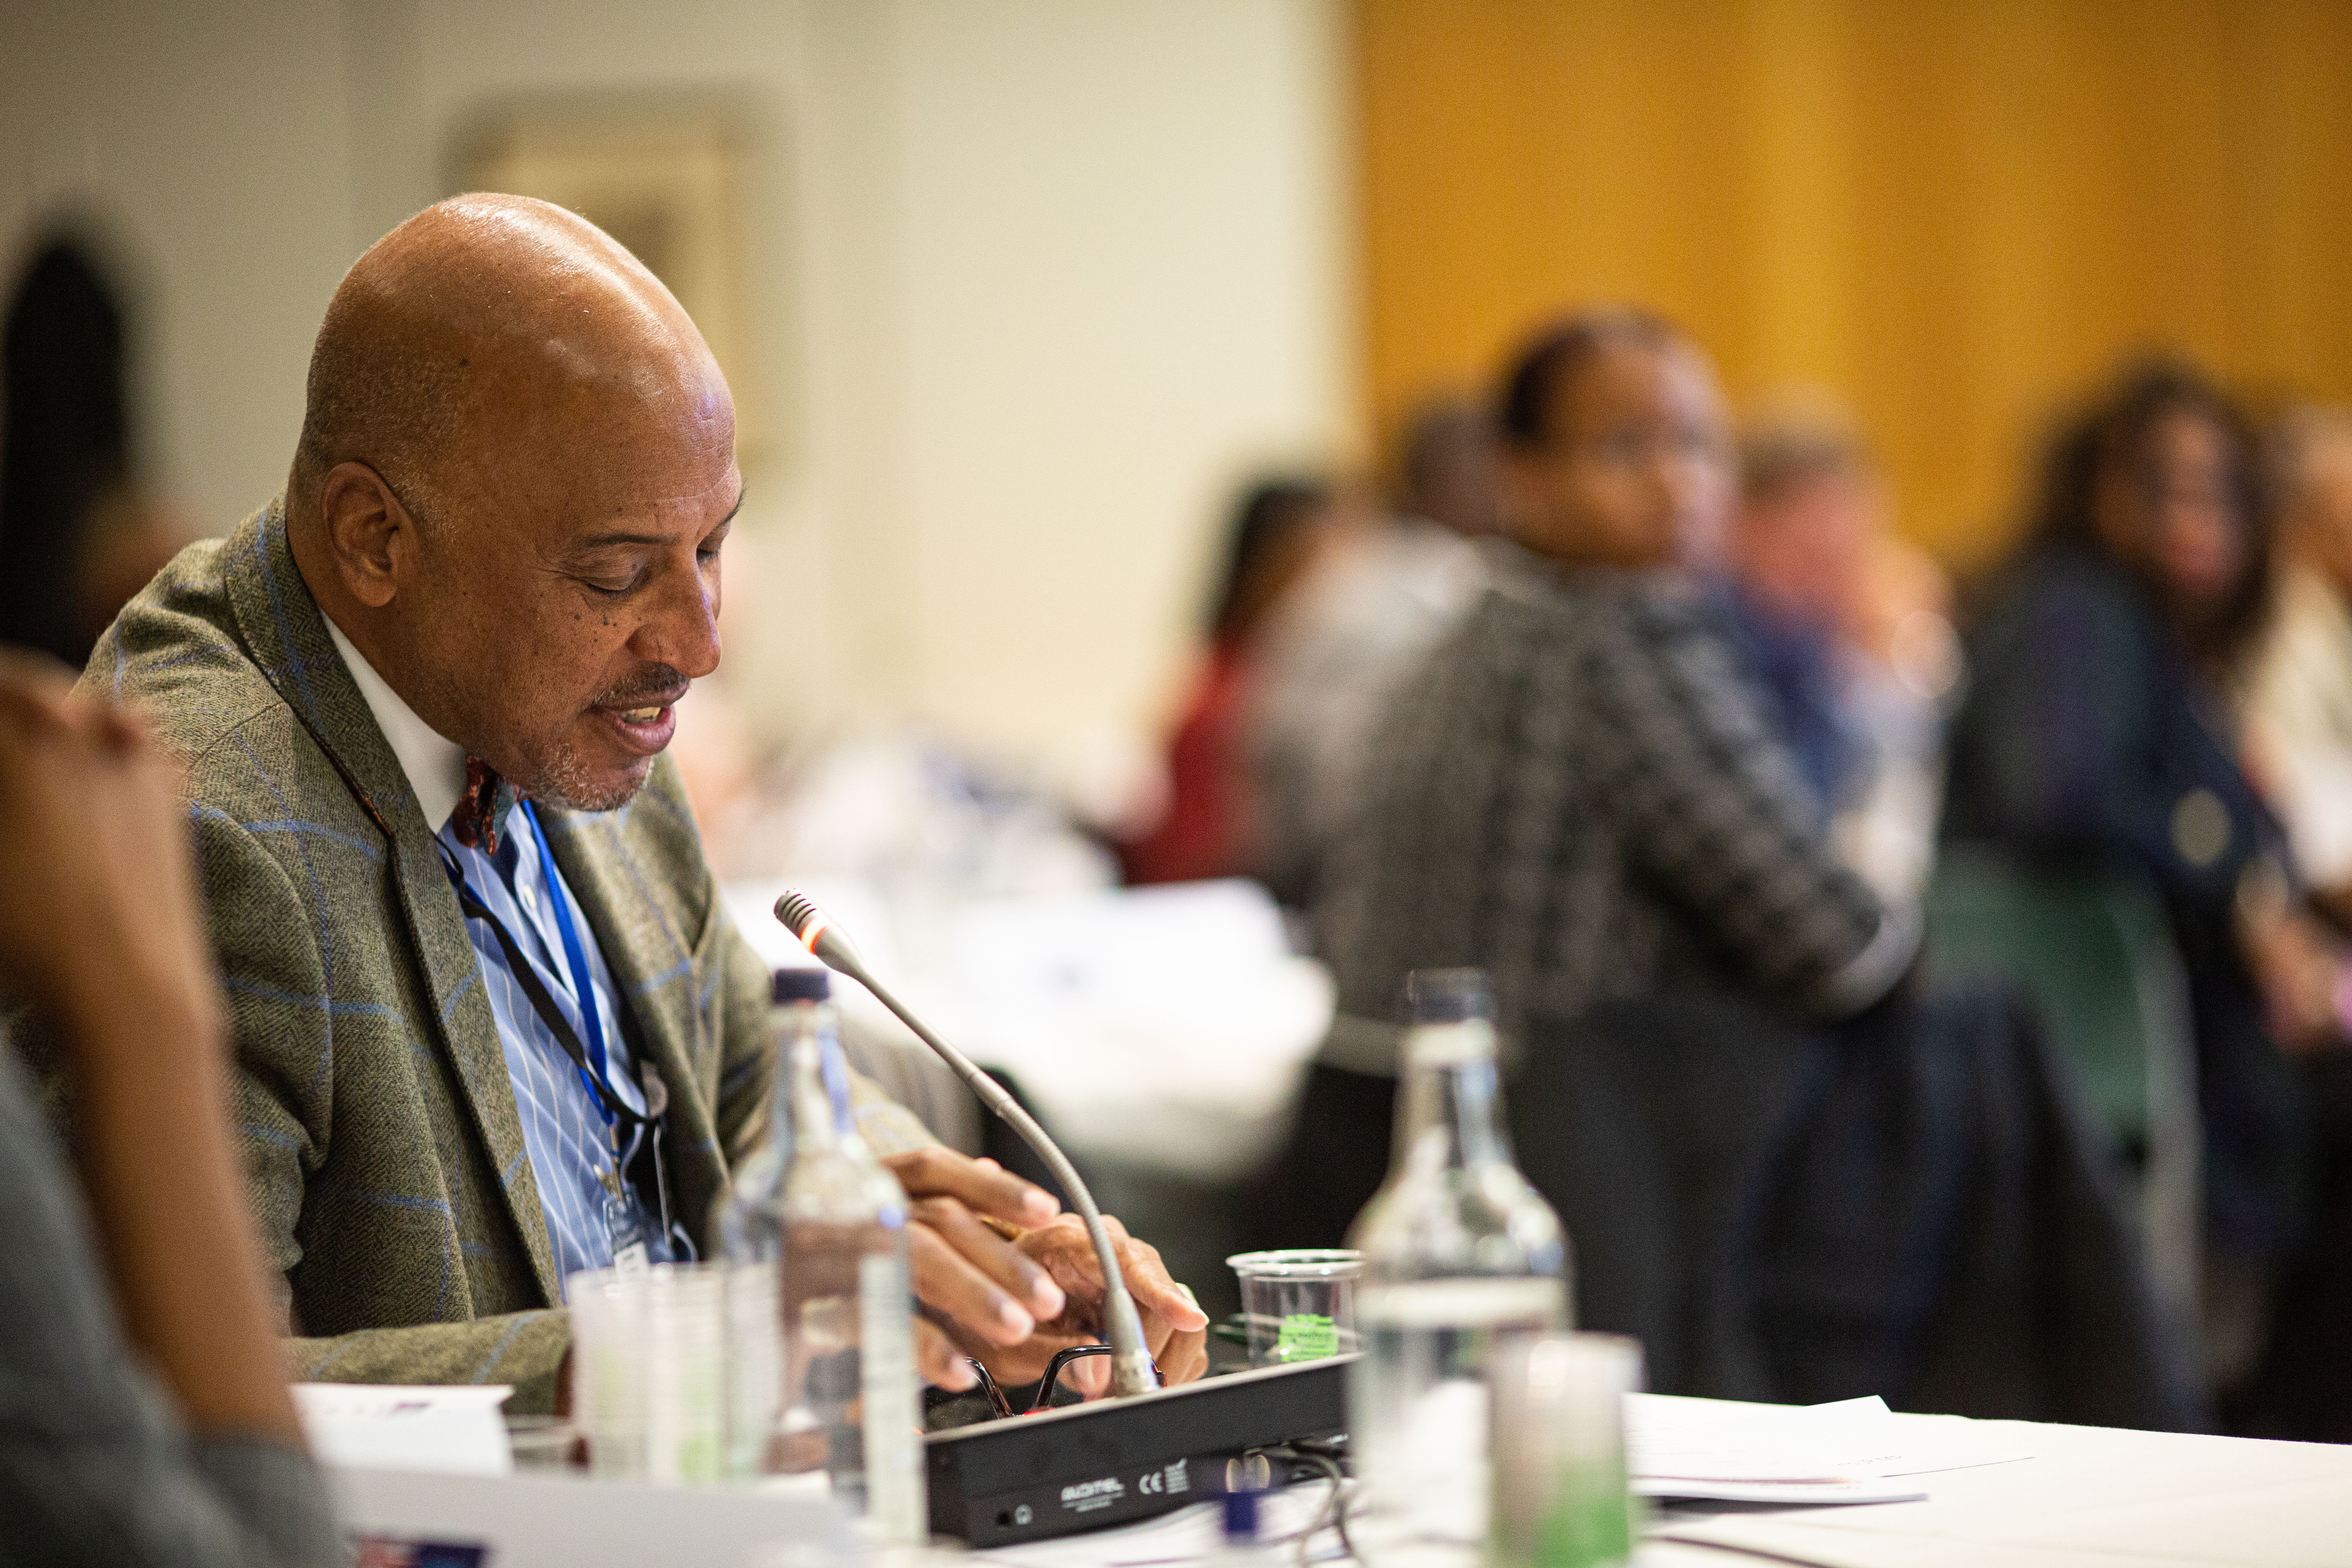 Overseas Territories Forum Delegate contributes to a discussion